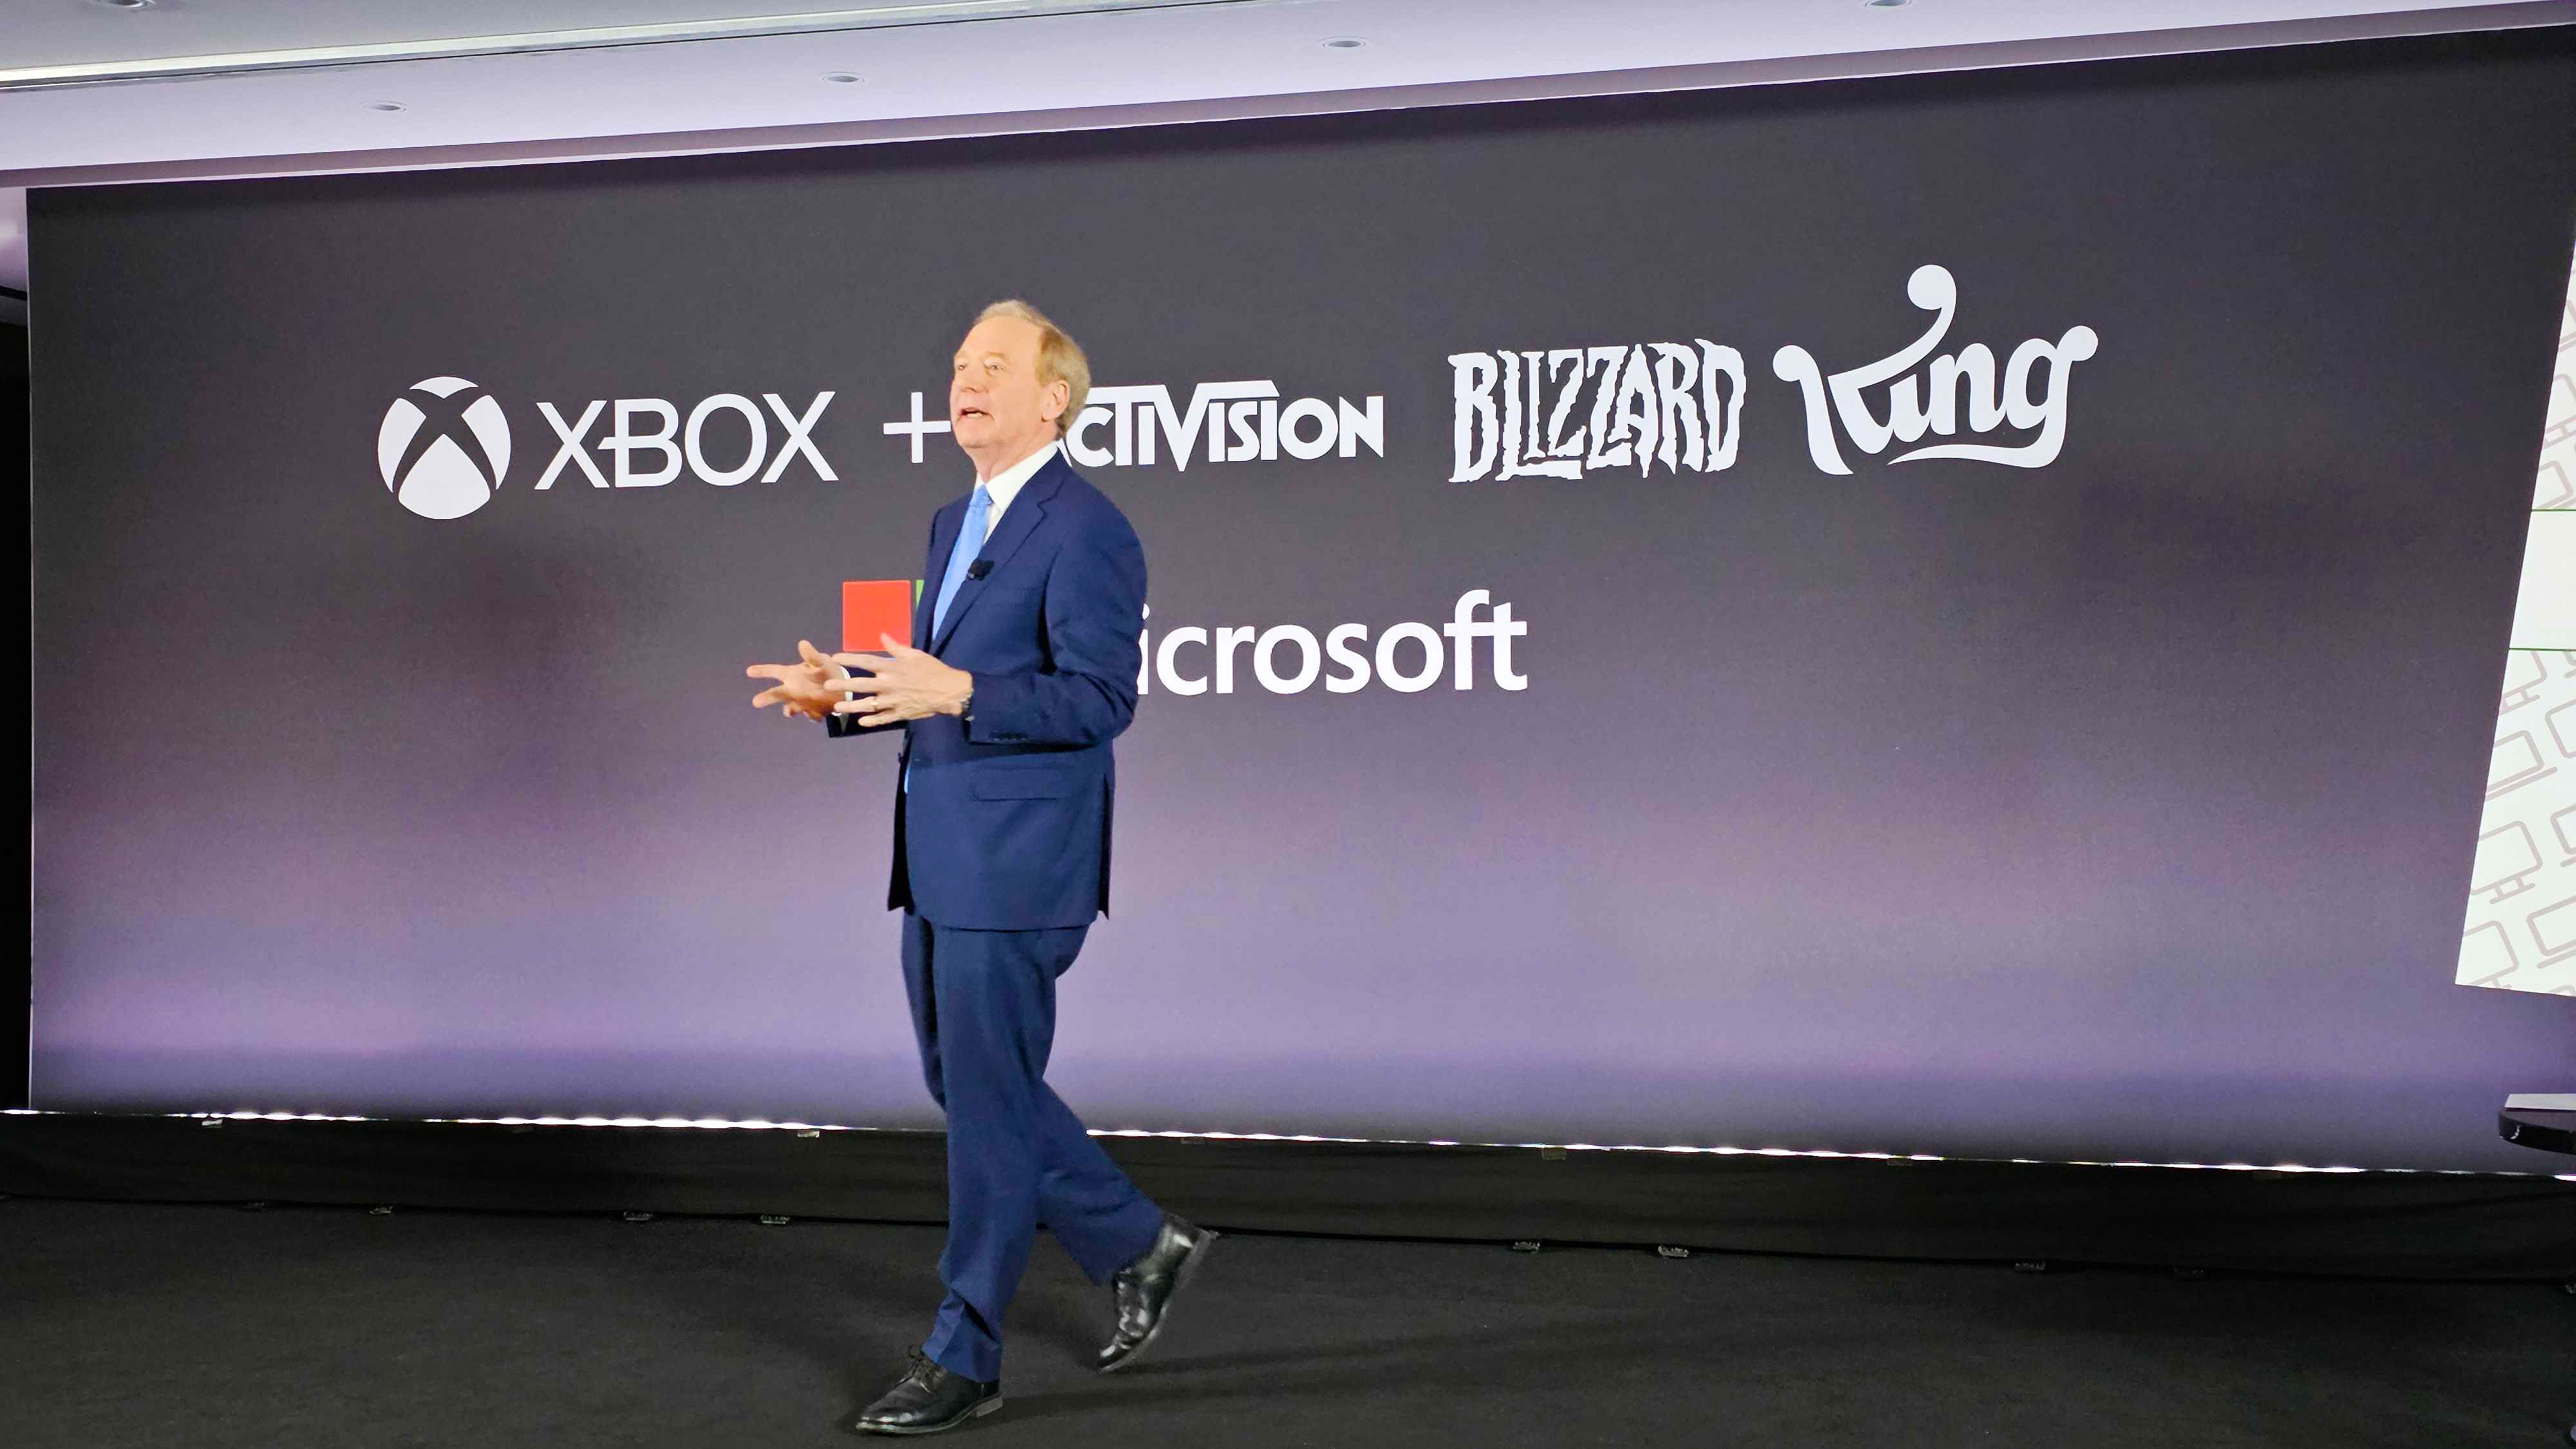 Microsoft's acquisition of Activision Blizzard approved by Brazilian  regulator